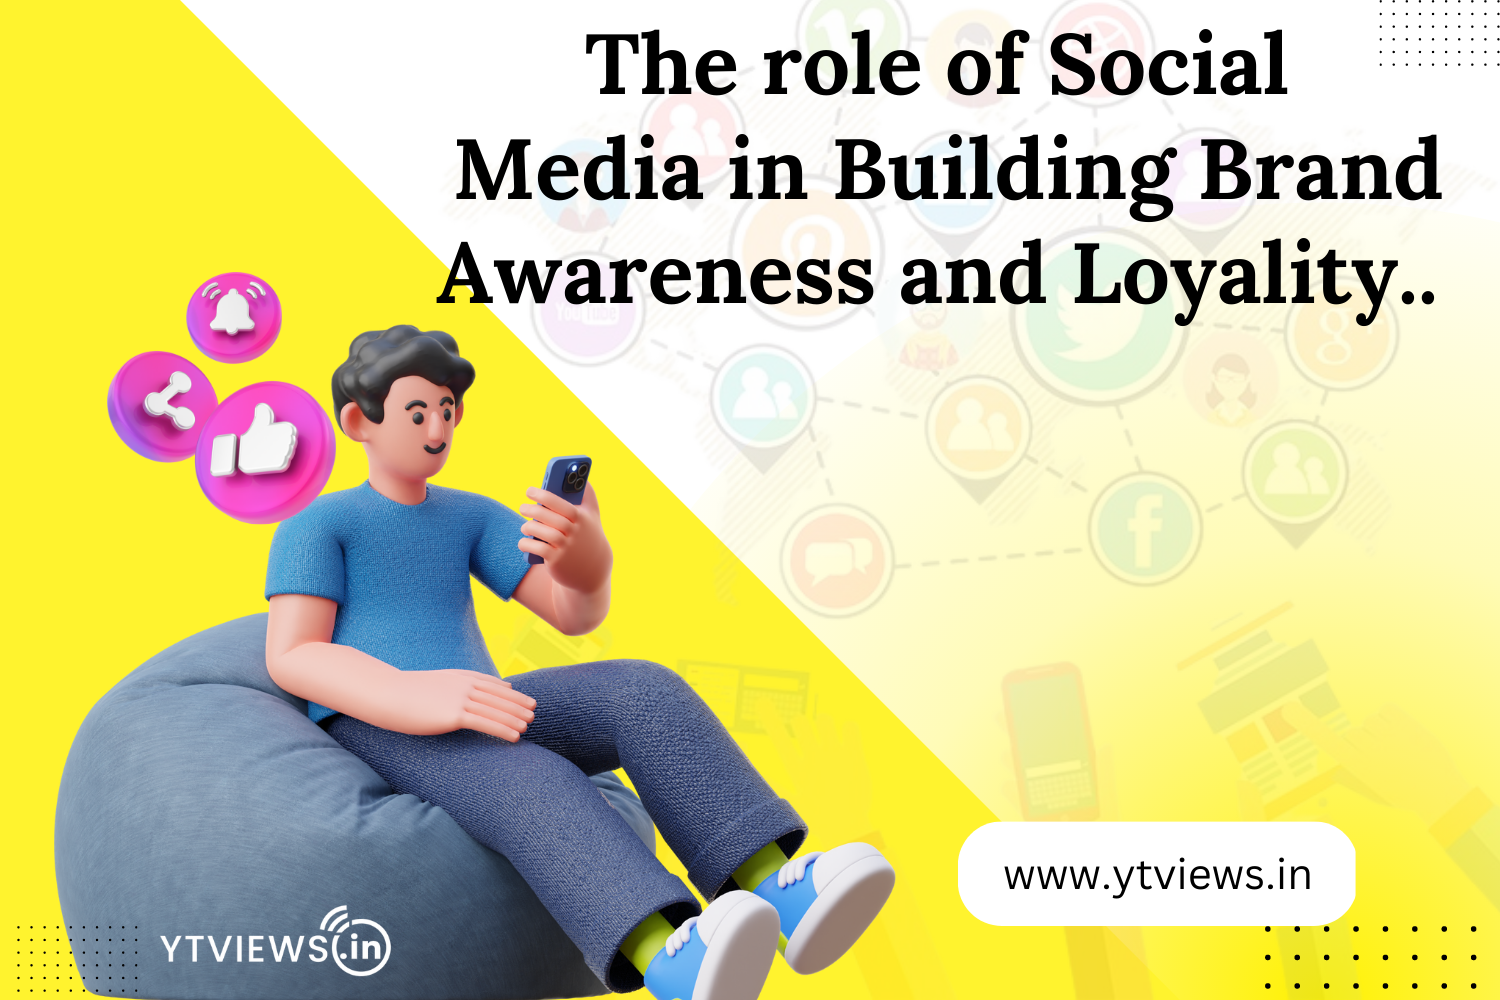 The role of social media in building brand awareness and loyalty